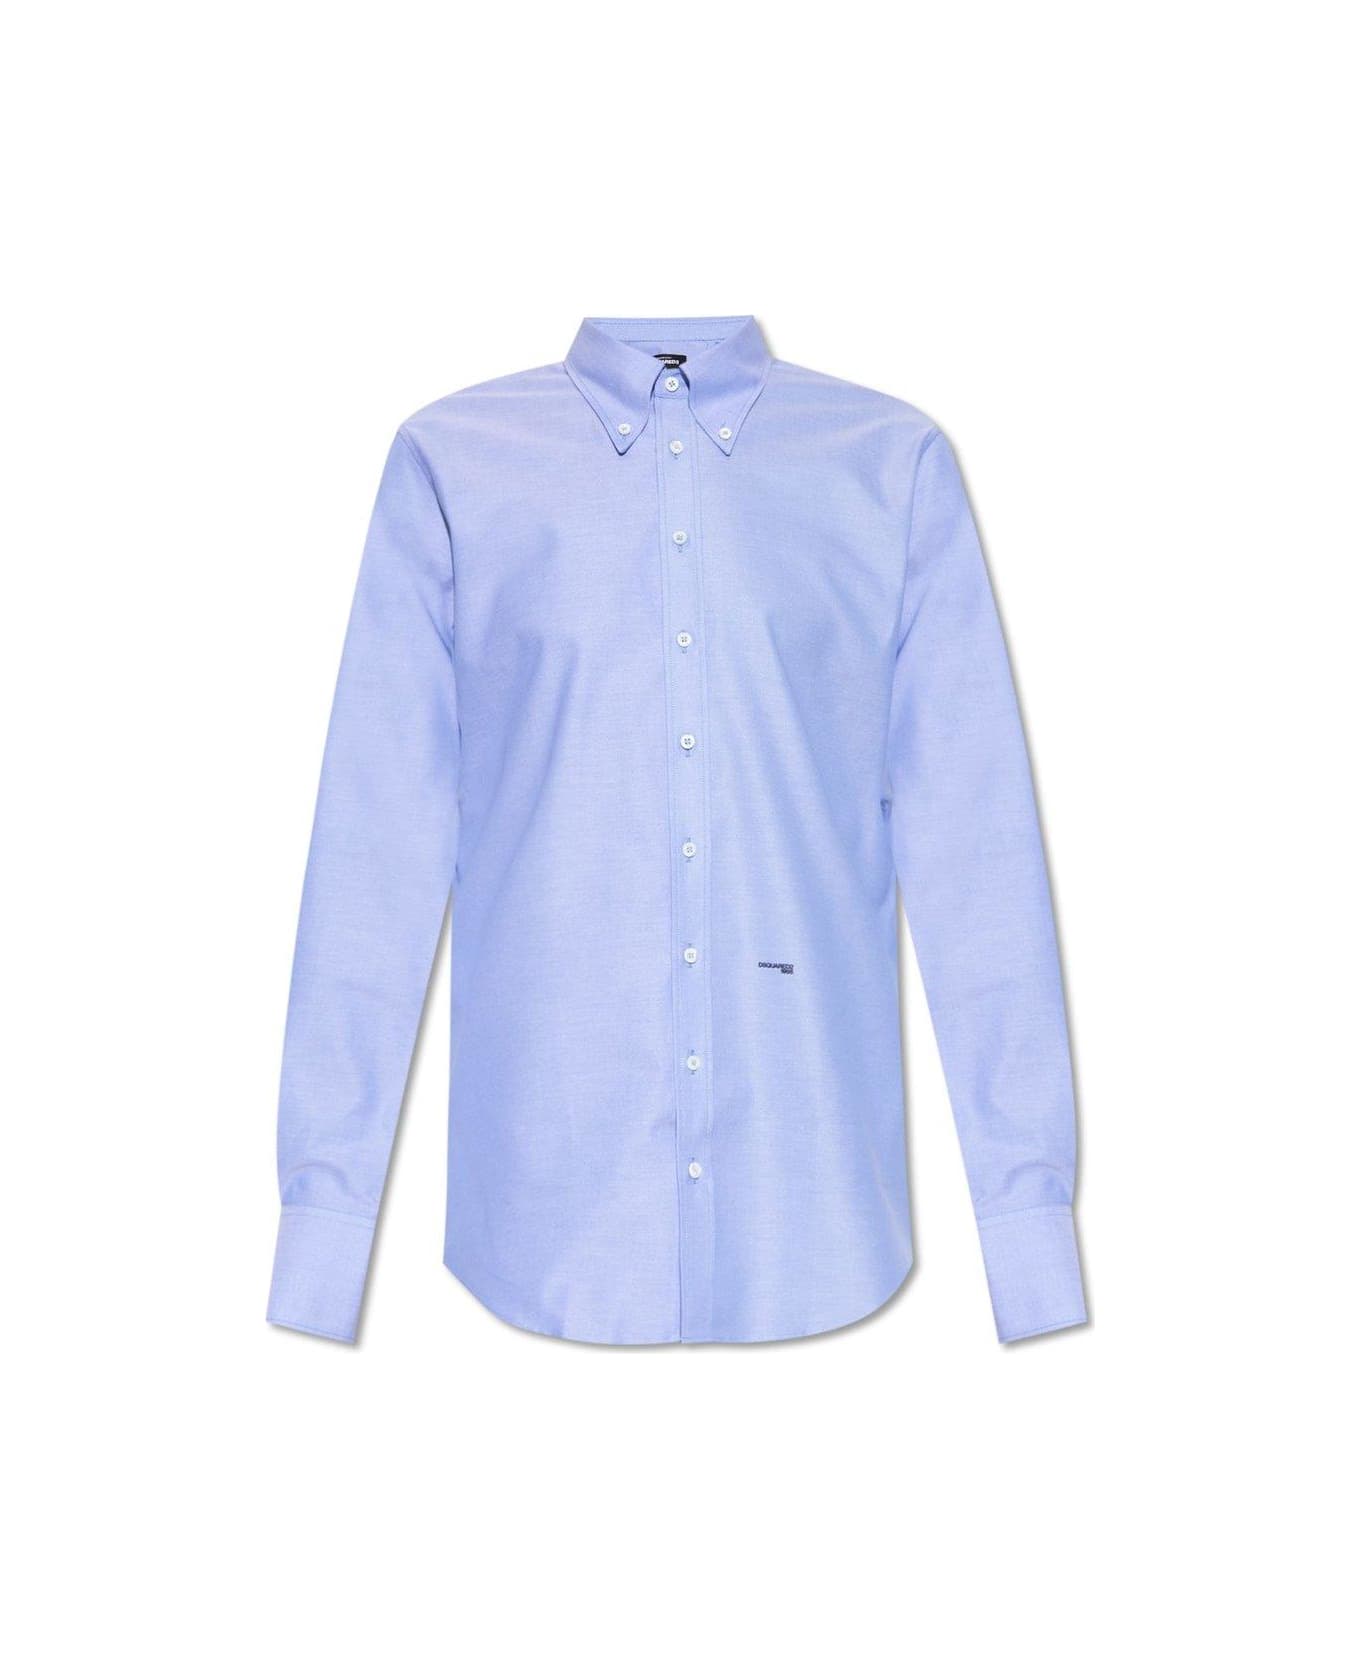 Dsquared2 Long-sleeved Button-up Shirt - Light blue シャツ